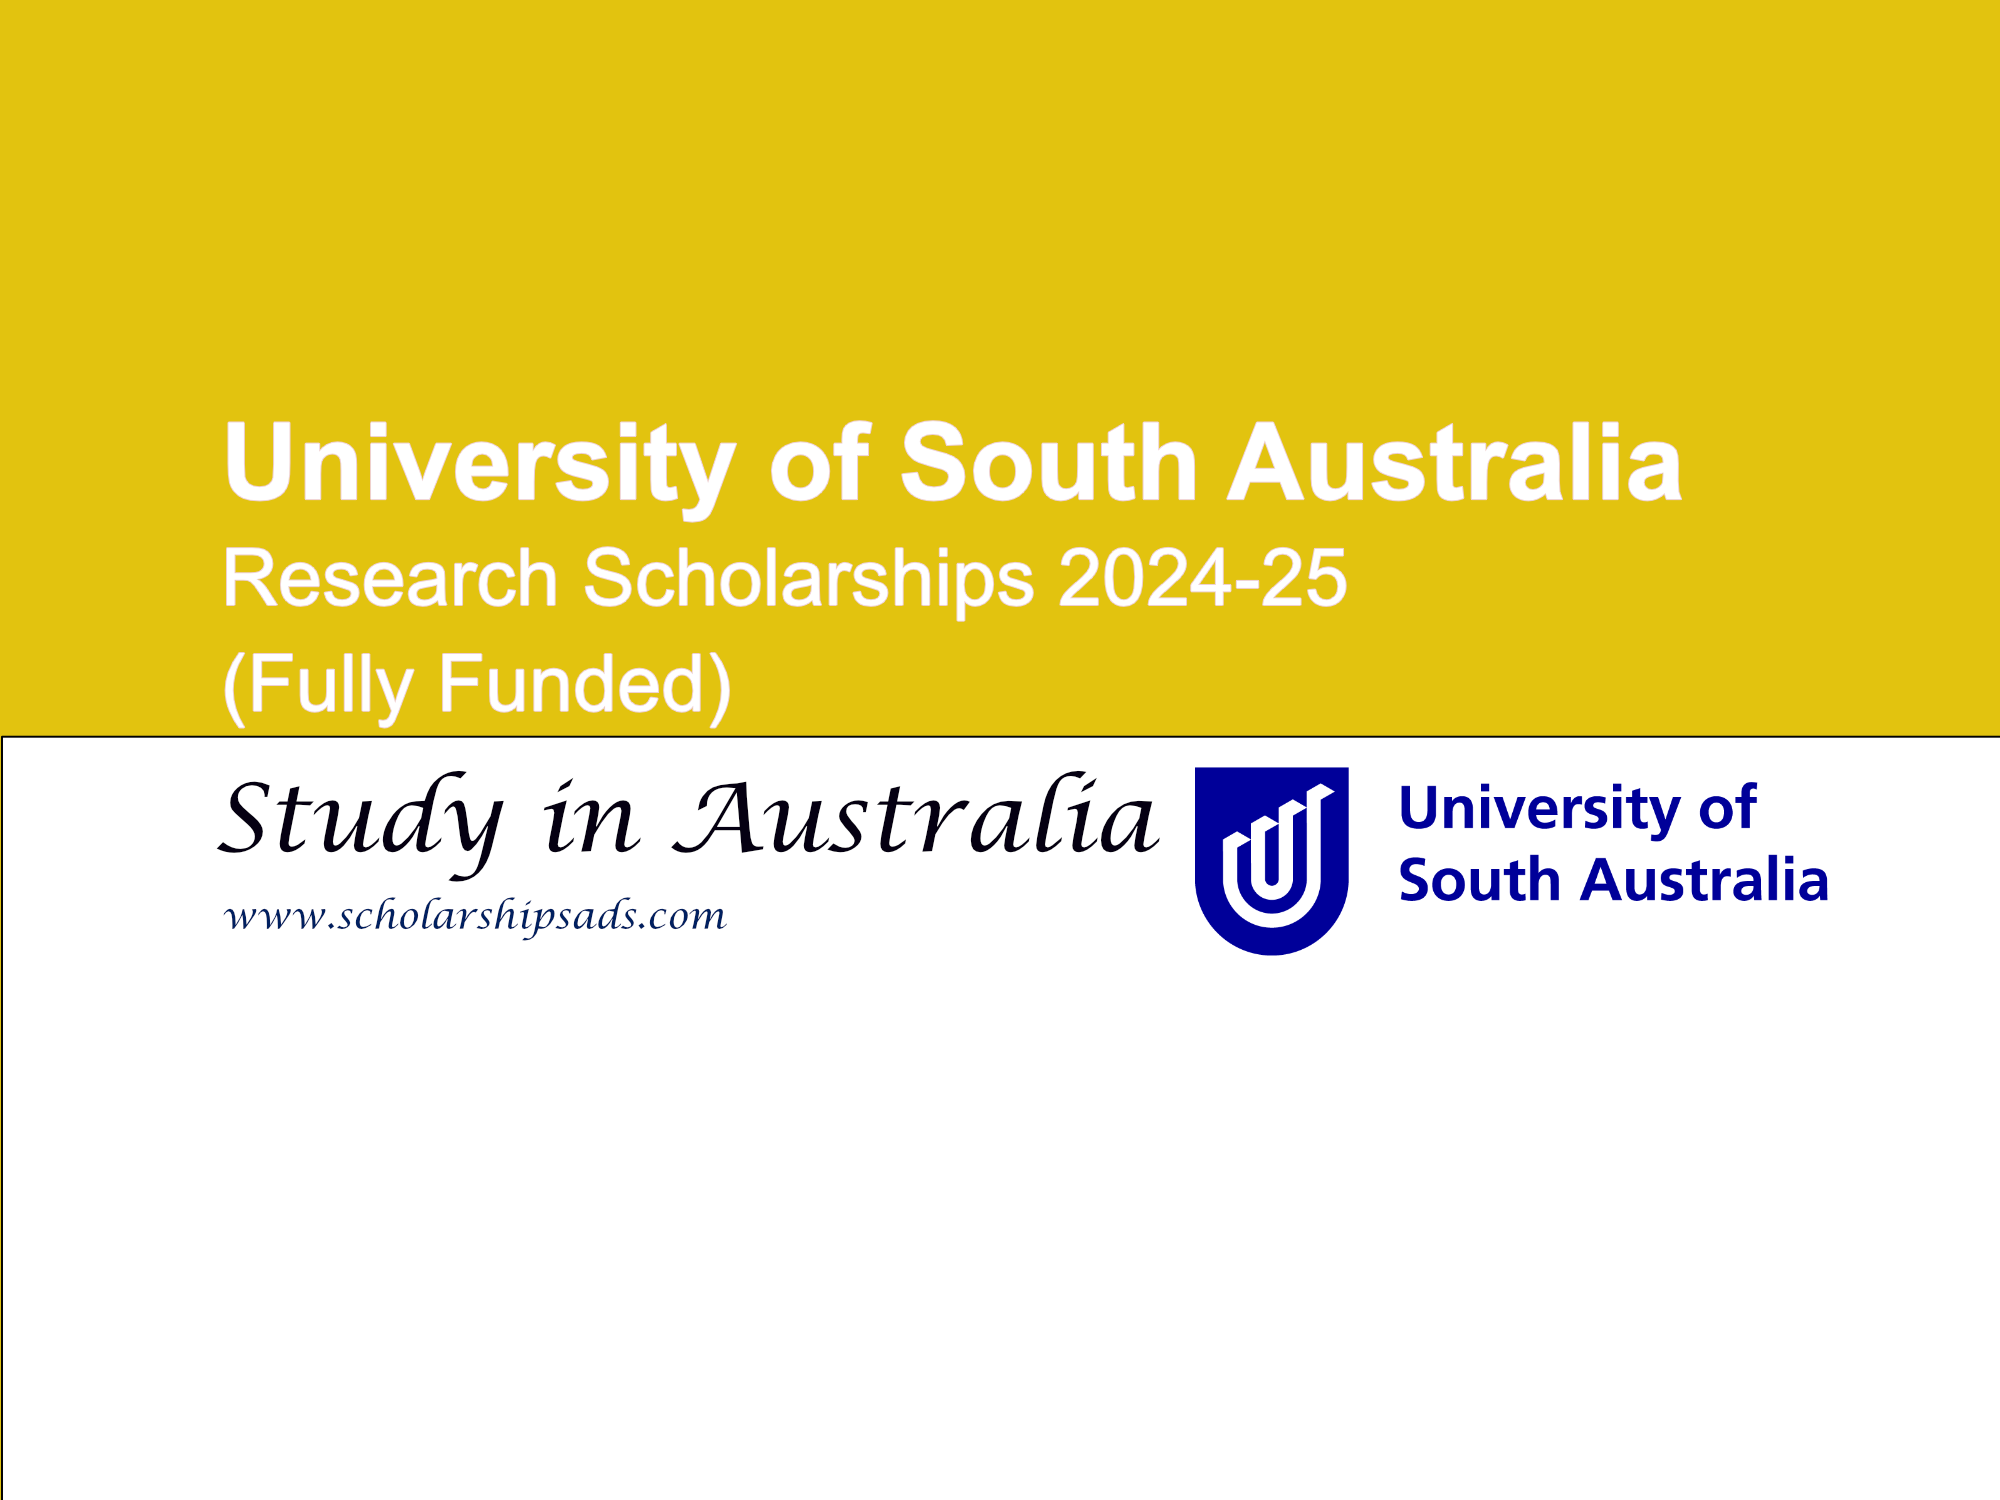 University of South Australia Research Scholarships 2024-2025. (Fully Funded)